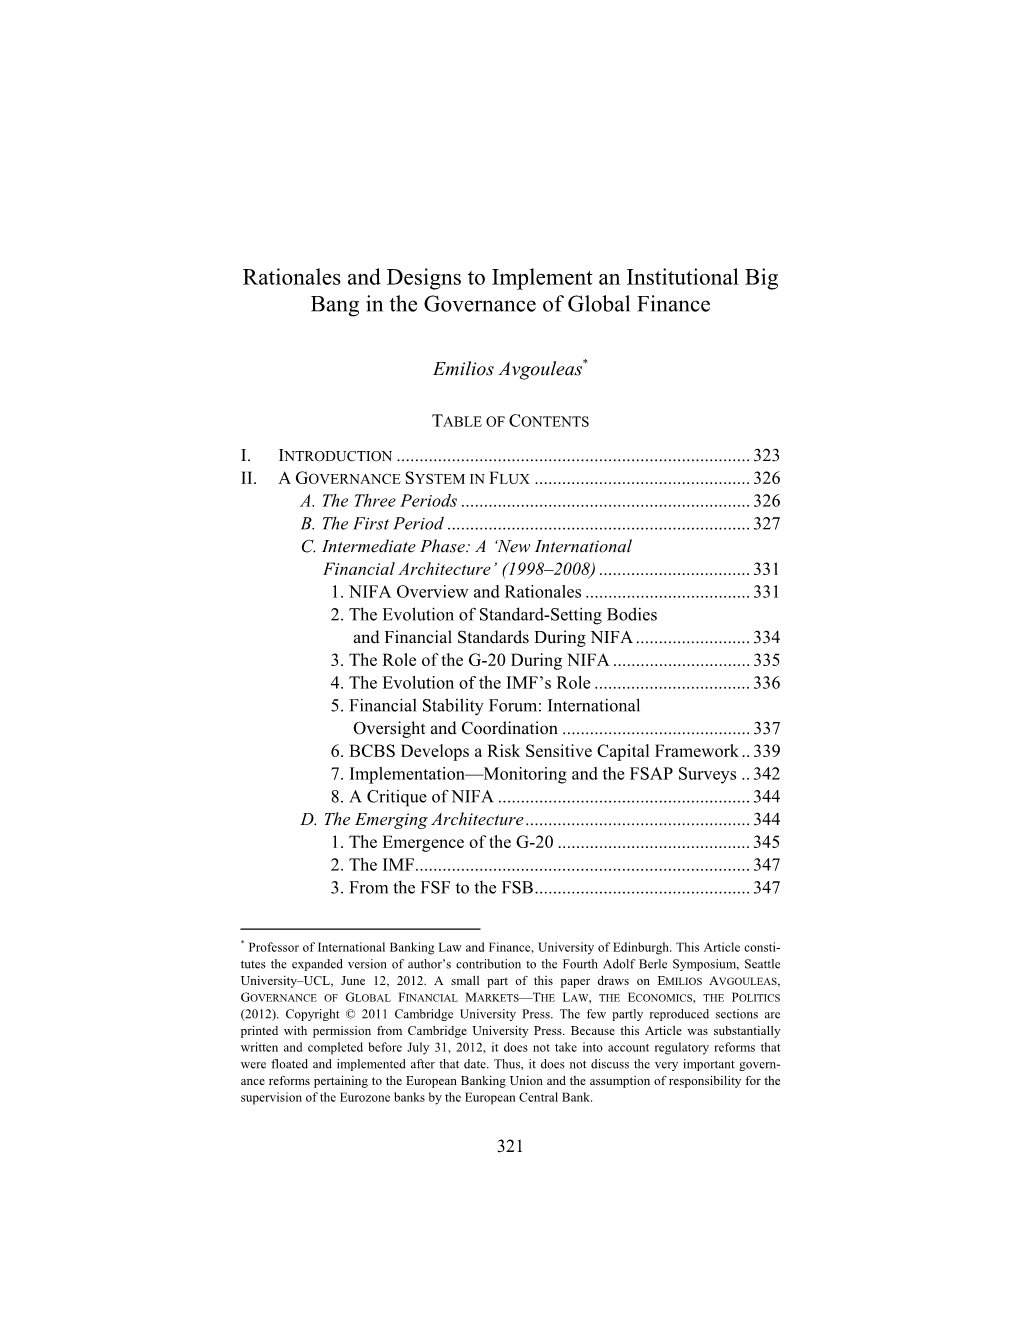 Rationales and Designs to Implement an Institutional Big Bang in the Governance of Global Finance